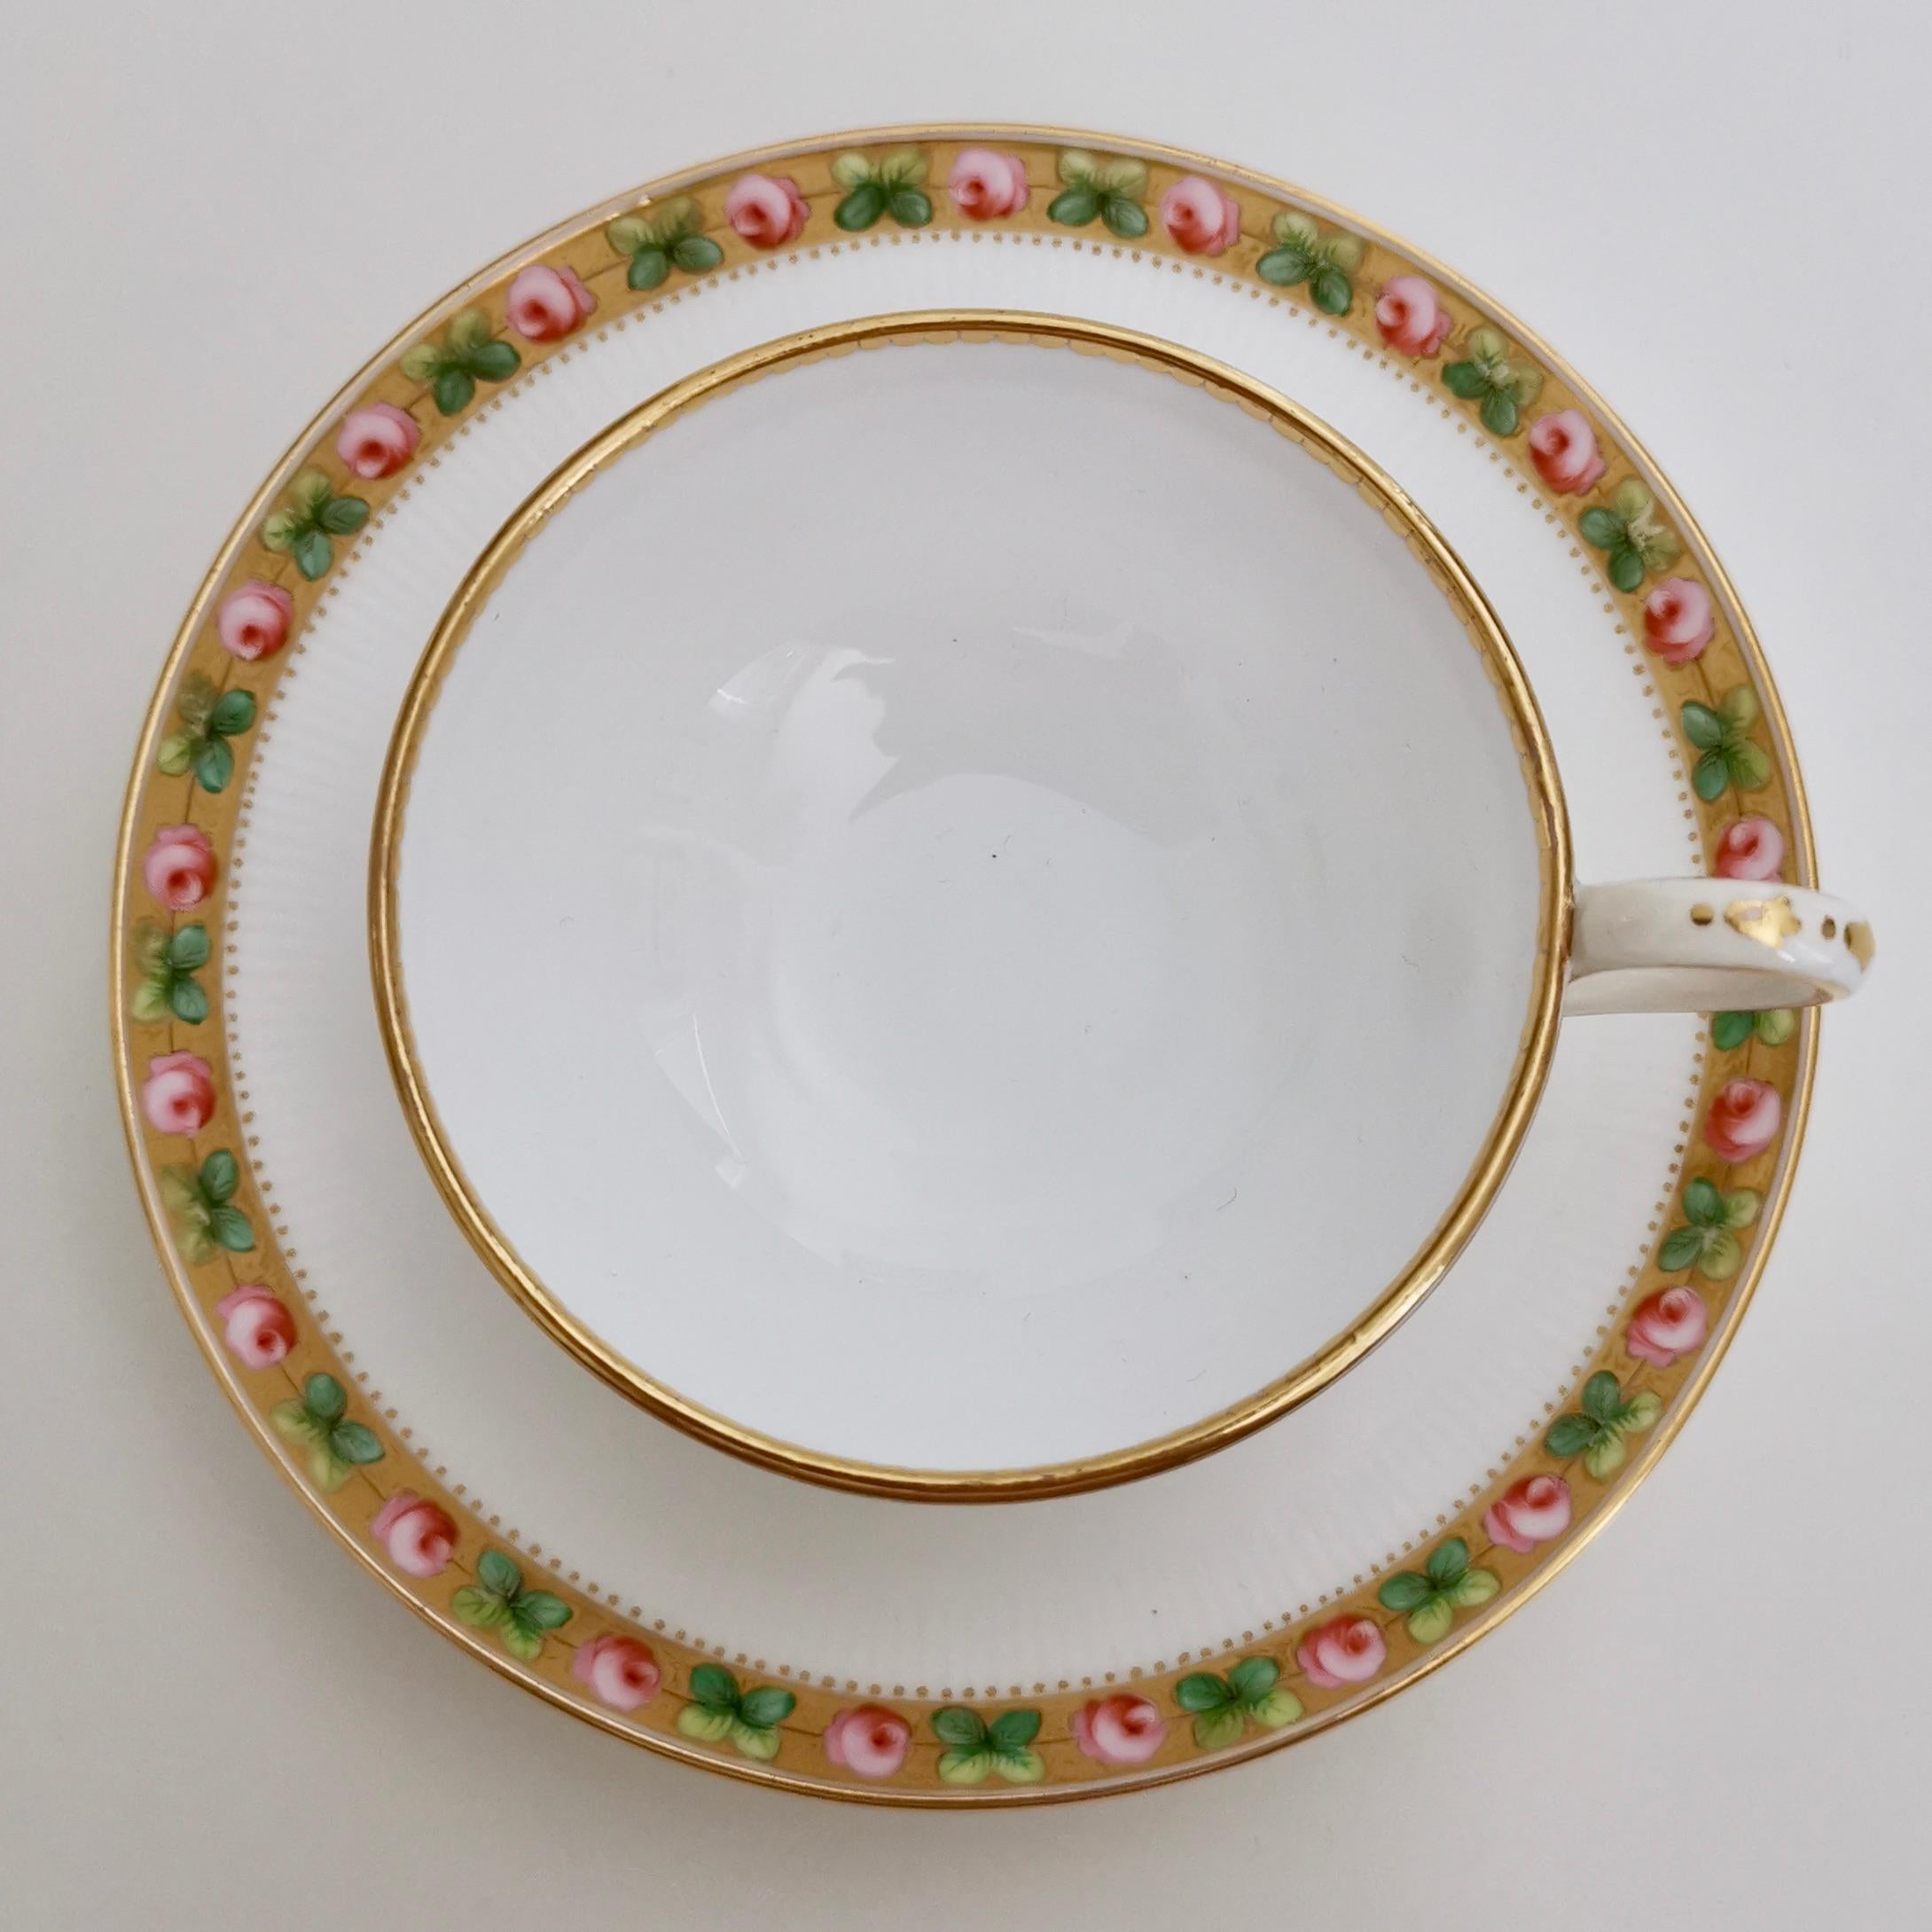 Hand-Painted Minton Porcelain Teacup, White Paris Fluted with Roses and Gilt, 1862